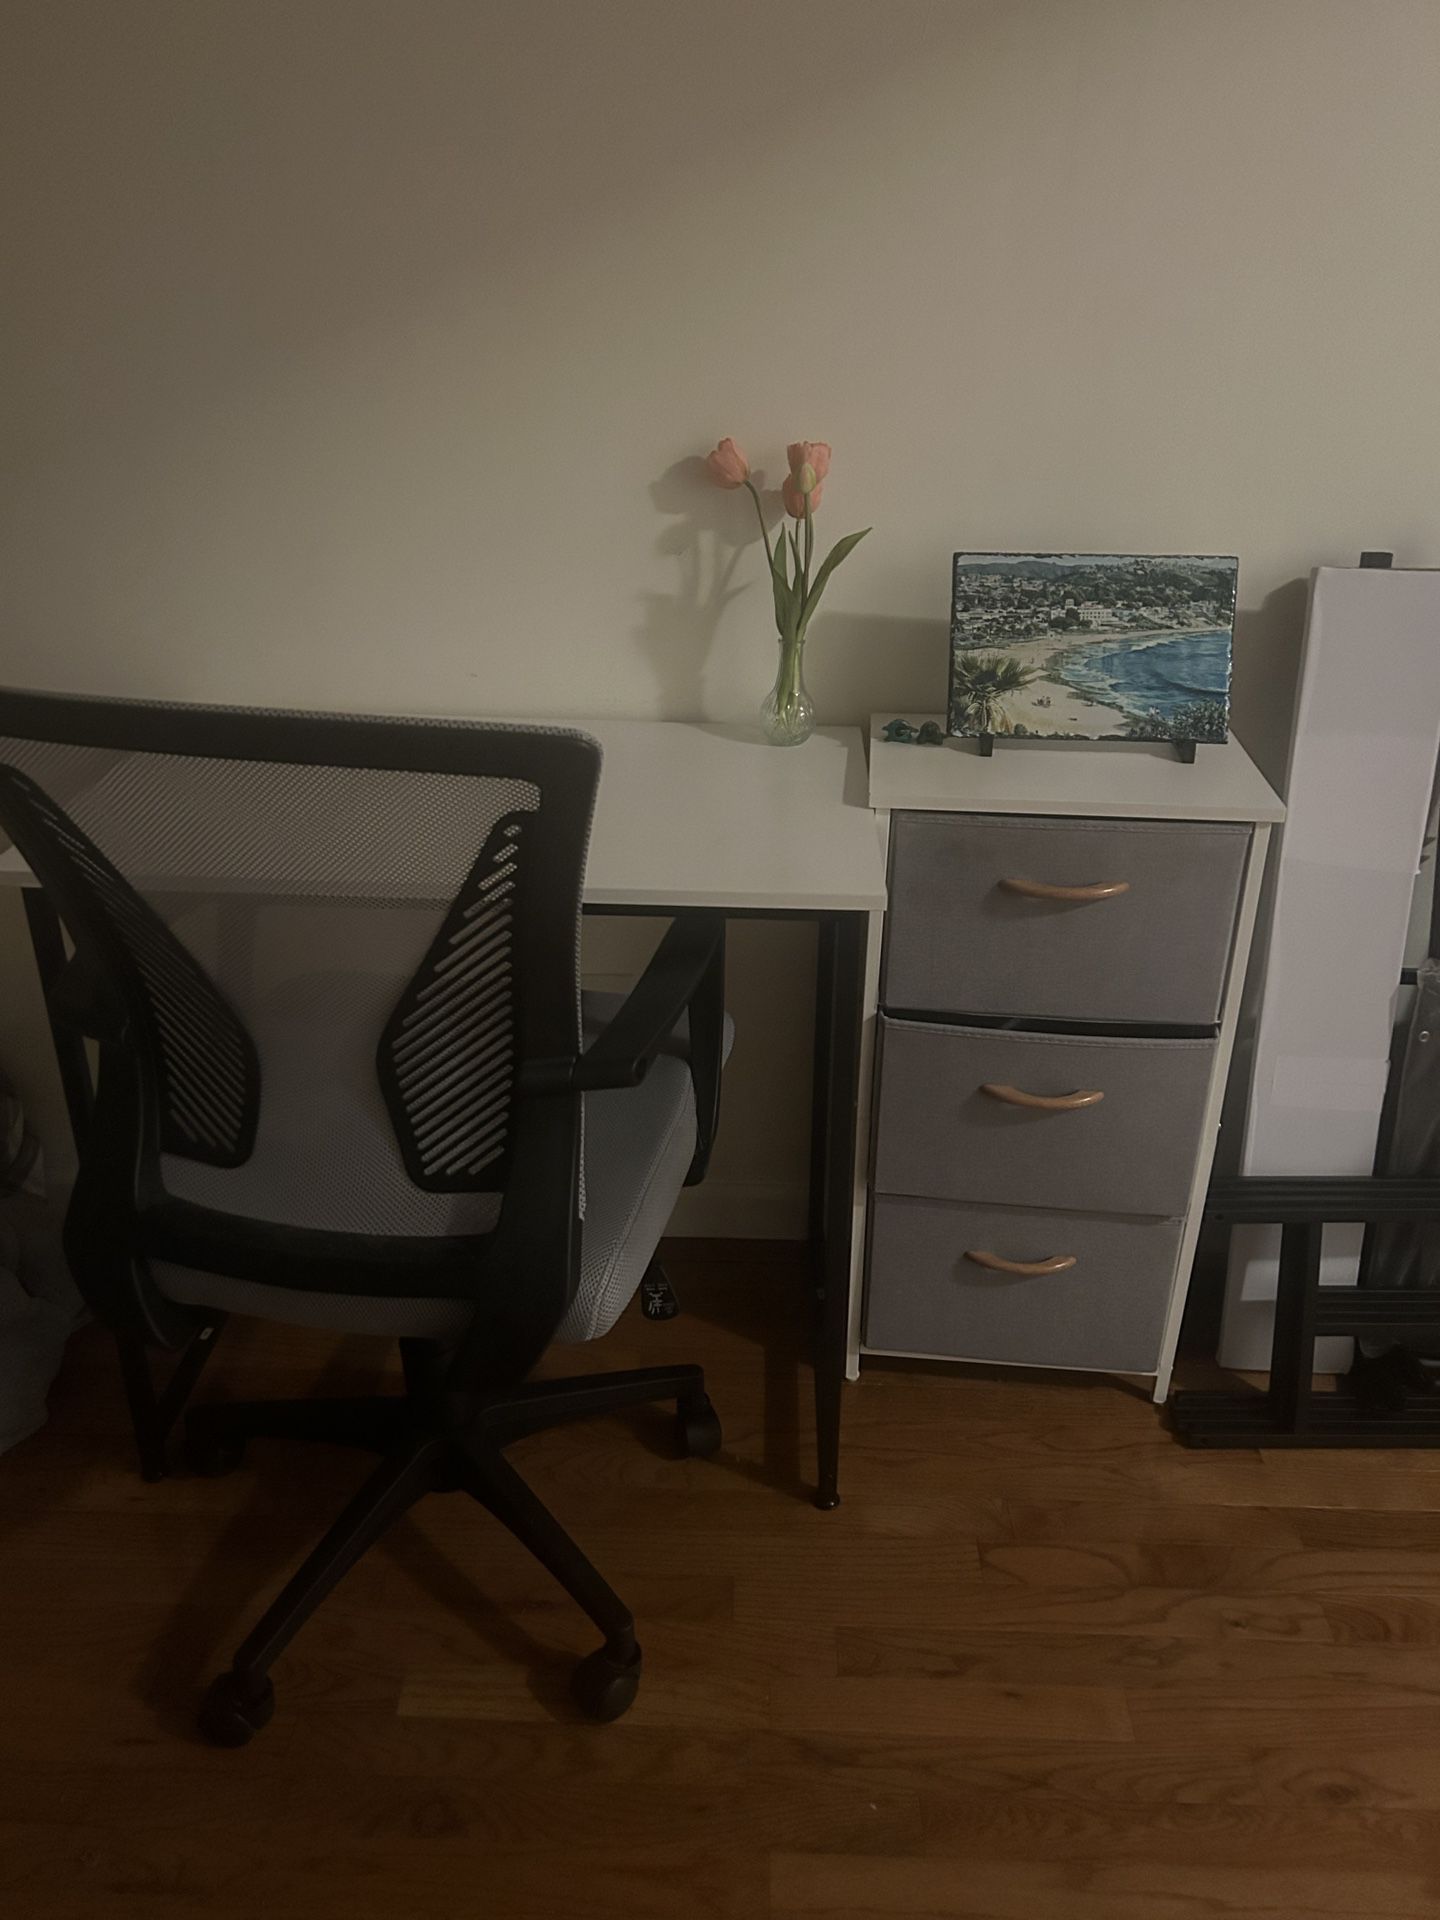 FREE Desk, Chair, And Clothing Storage